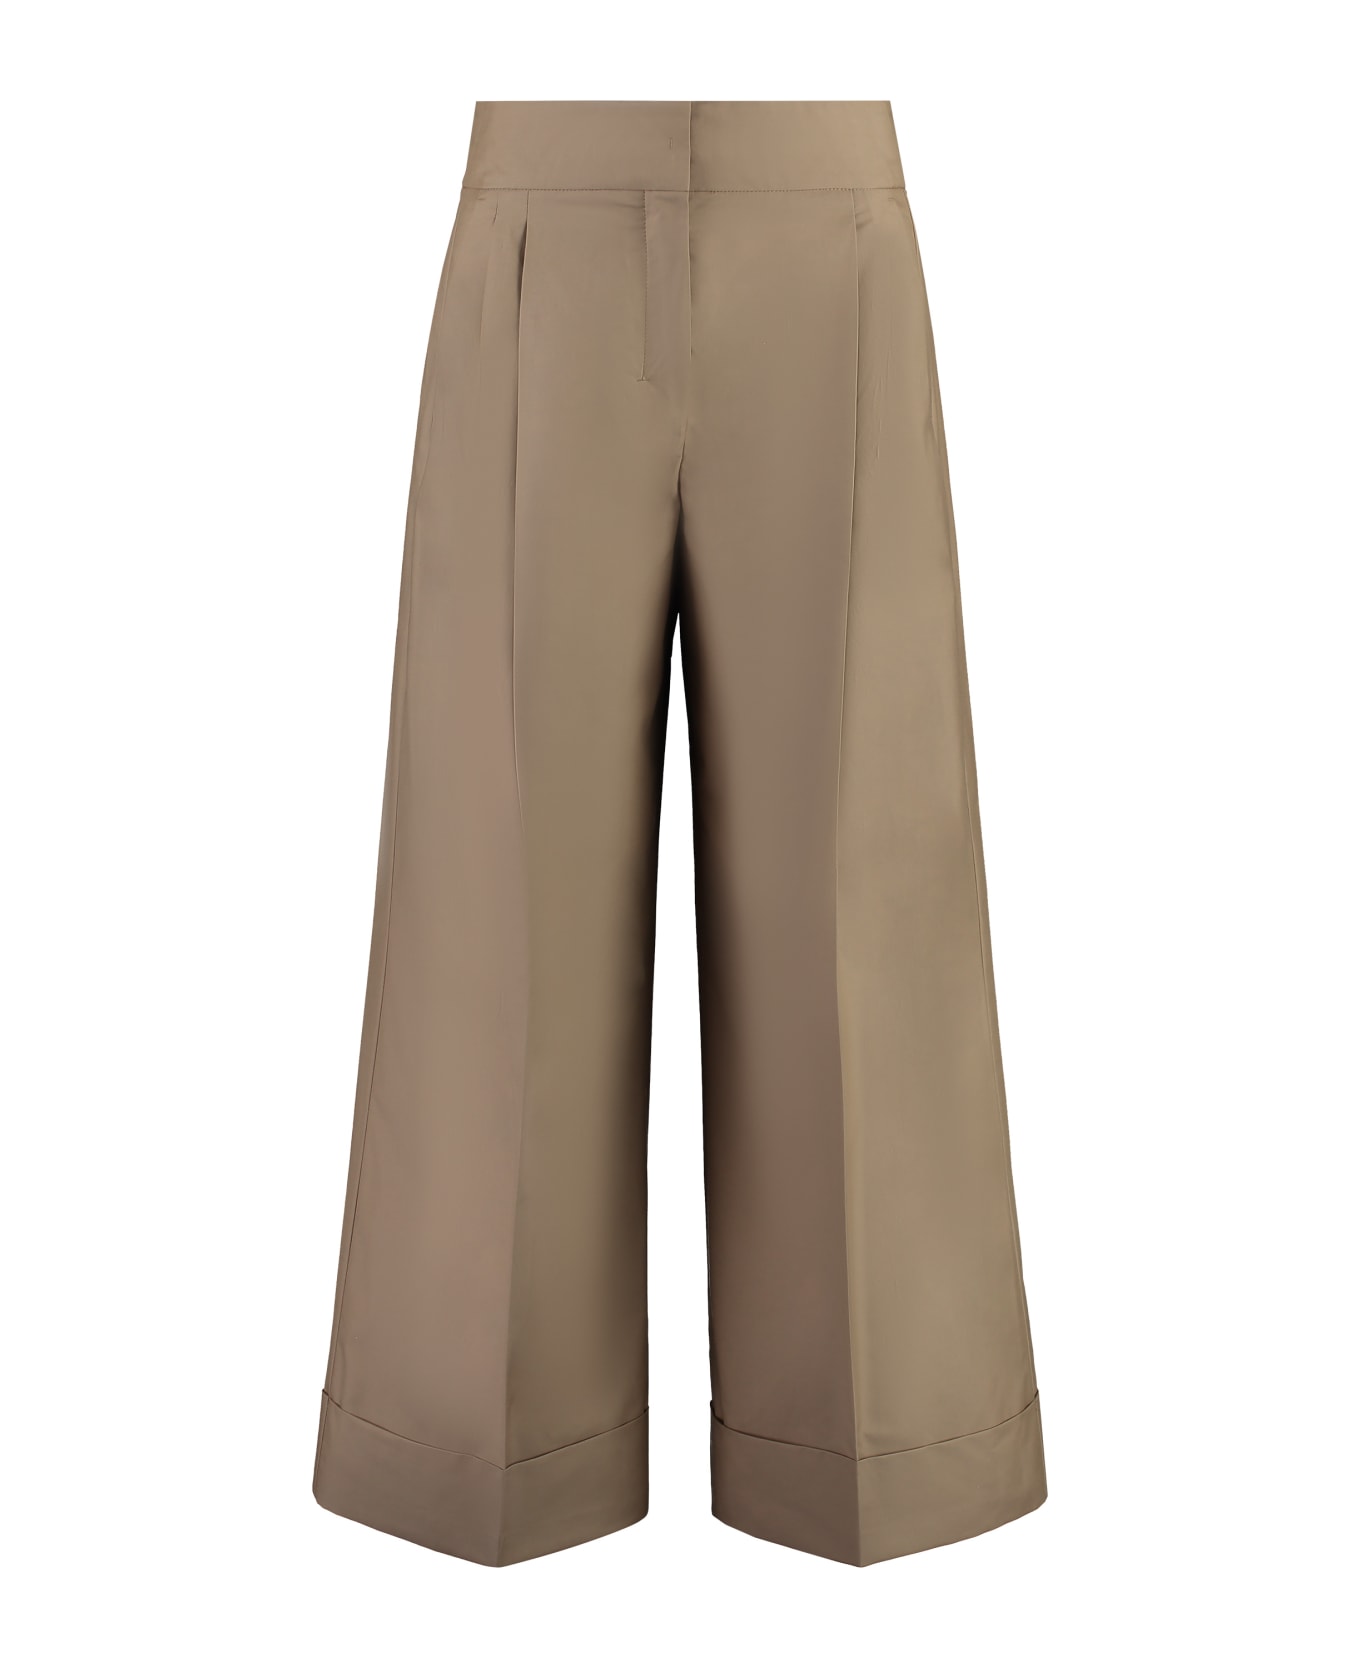 'S Max Mara Abba Cropped Trousers - Camel